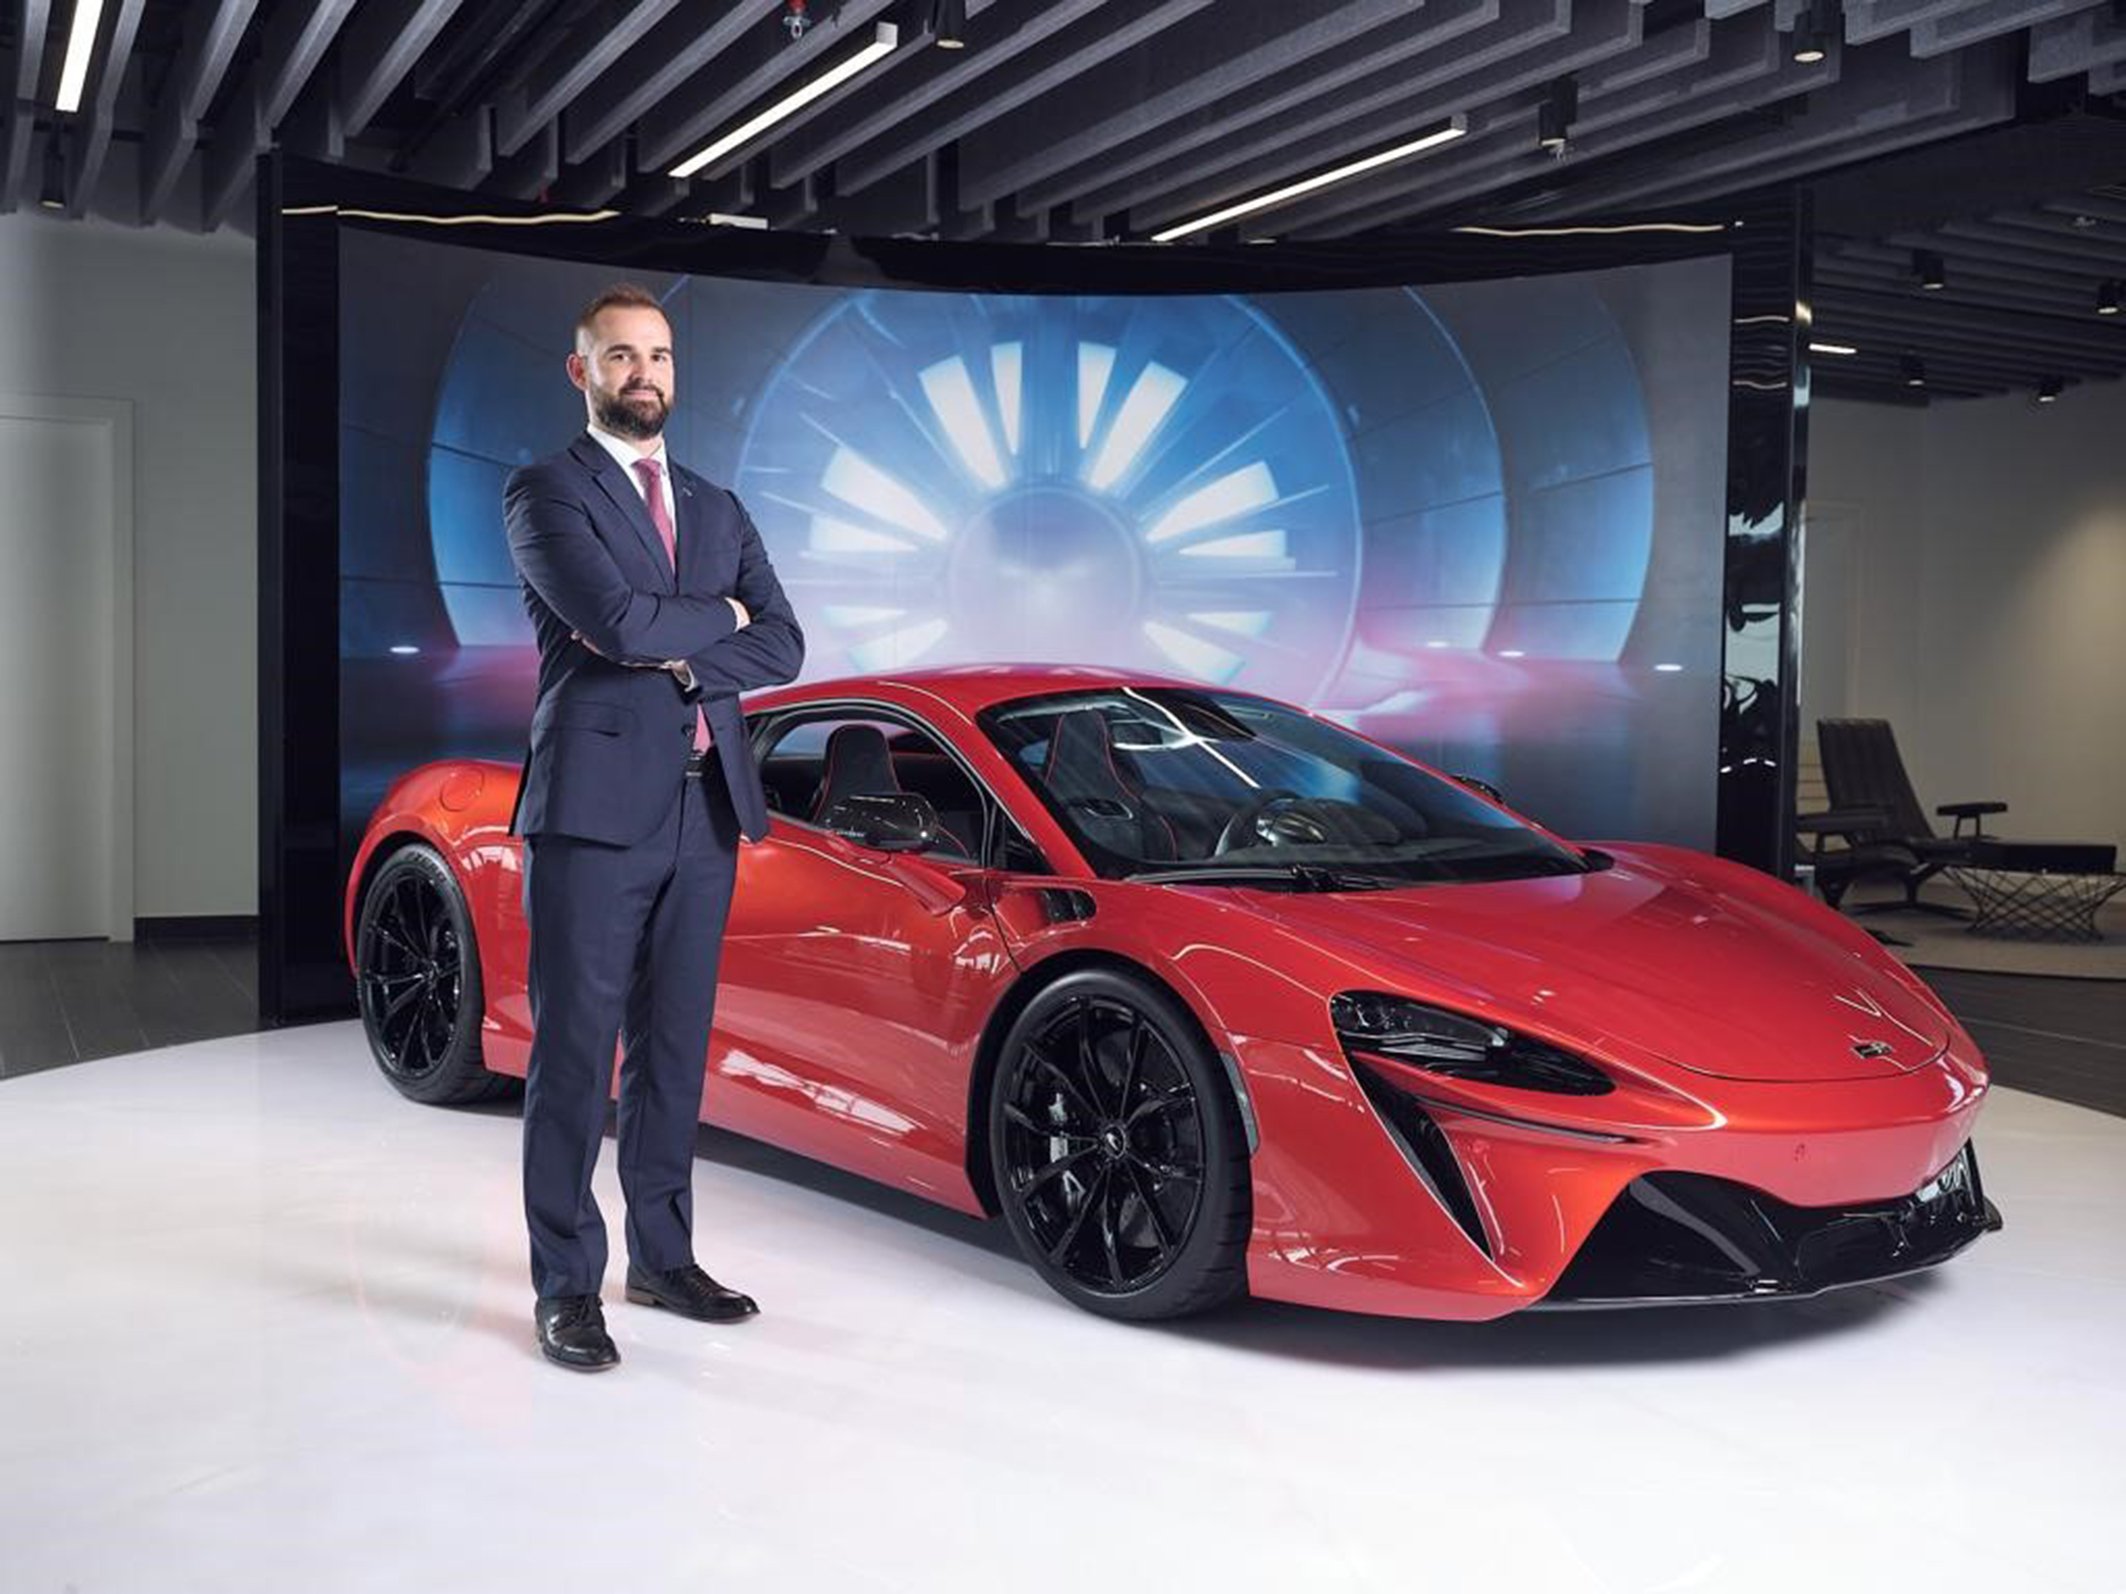 MCLAREN GEARS UP FOR MIDDLE EAST SUPERCAR SPENDING SPREE